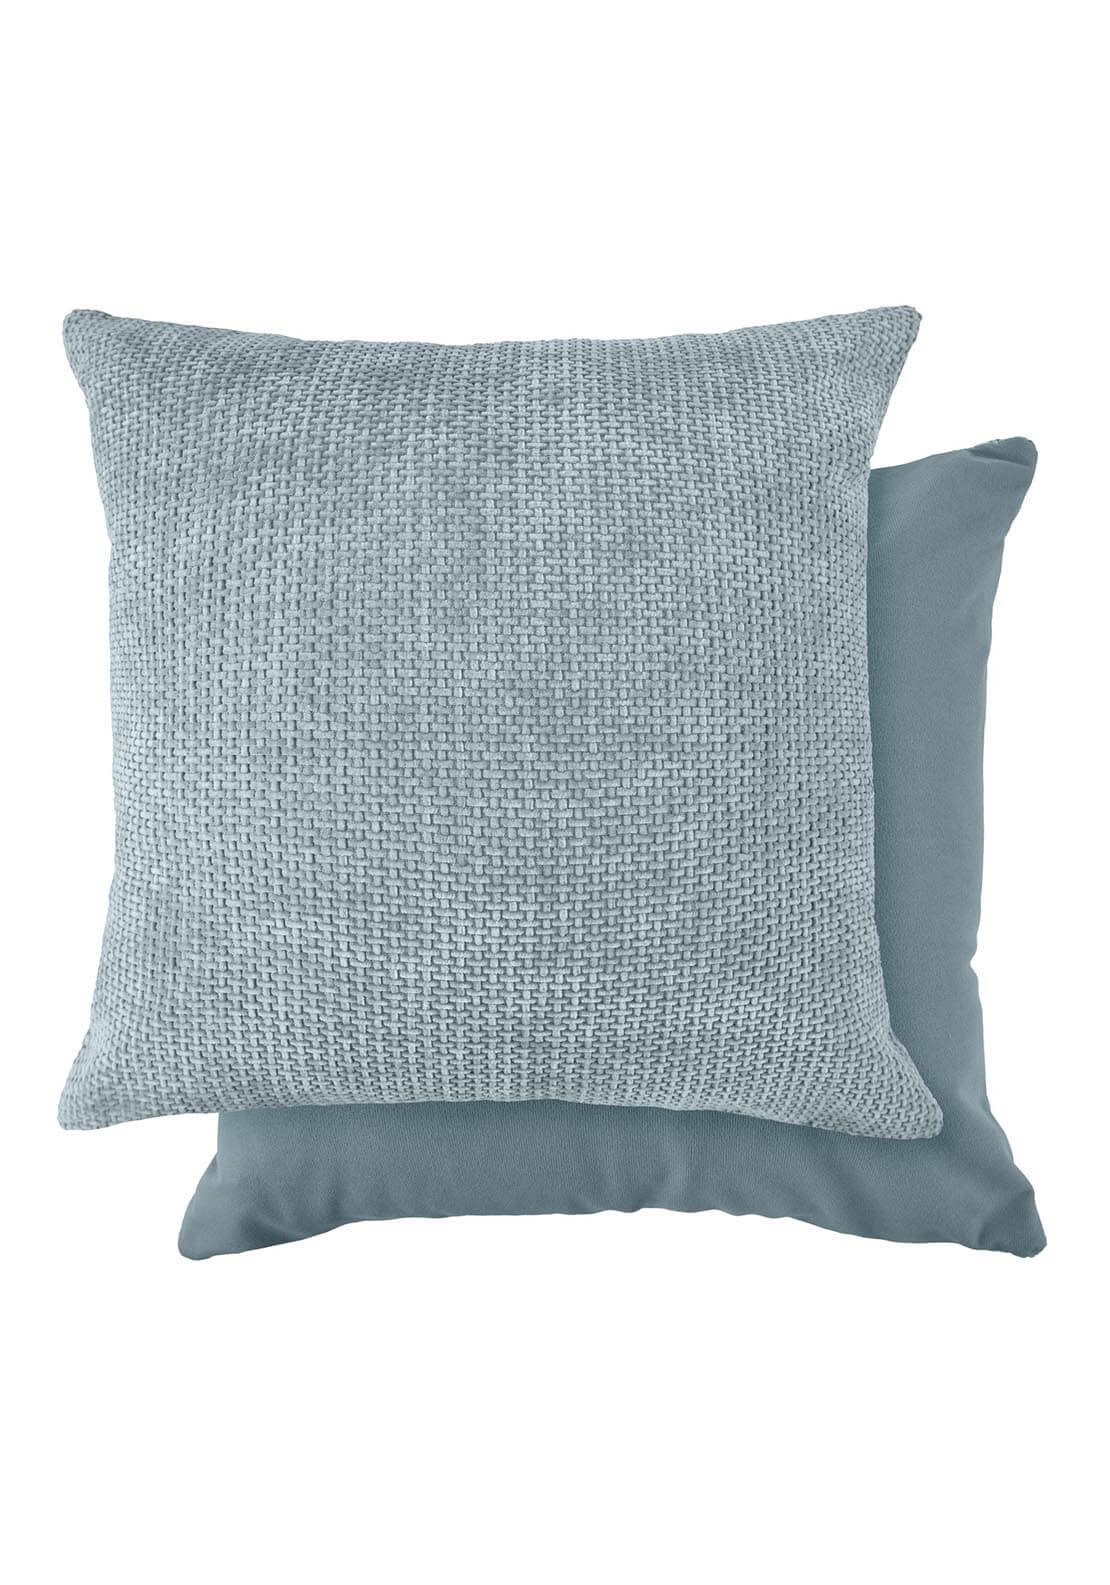 The Home Collection Portland Cushion 17&quot; x 17&quot; - Silver 2 Shaws Department Stores